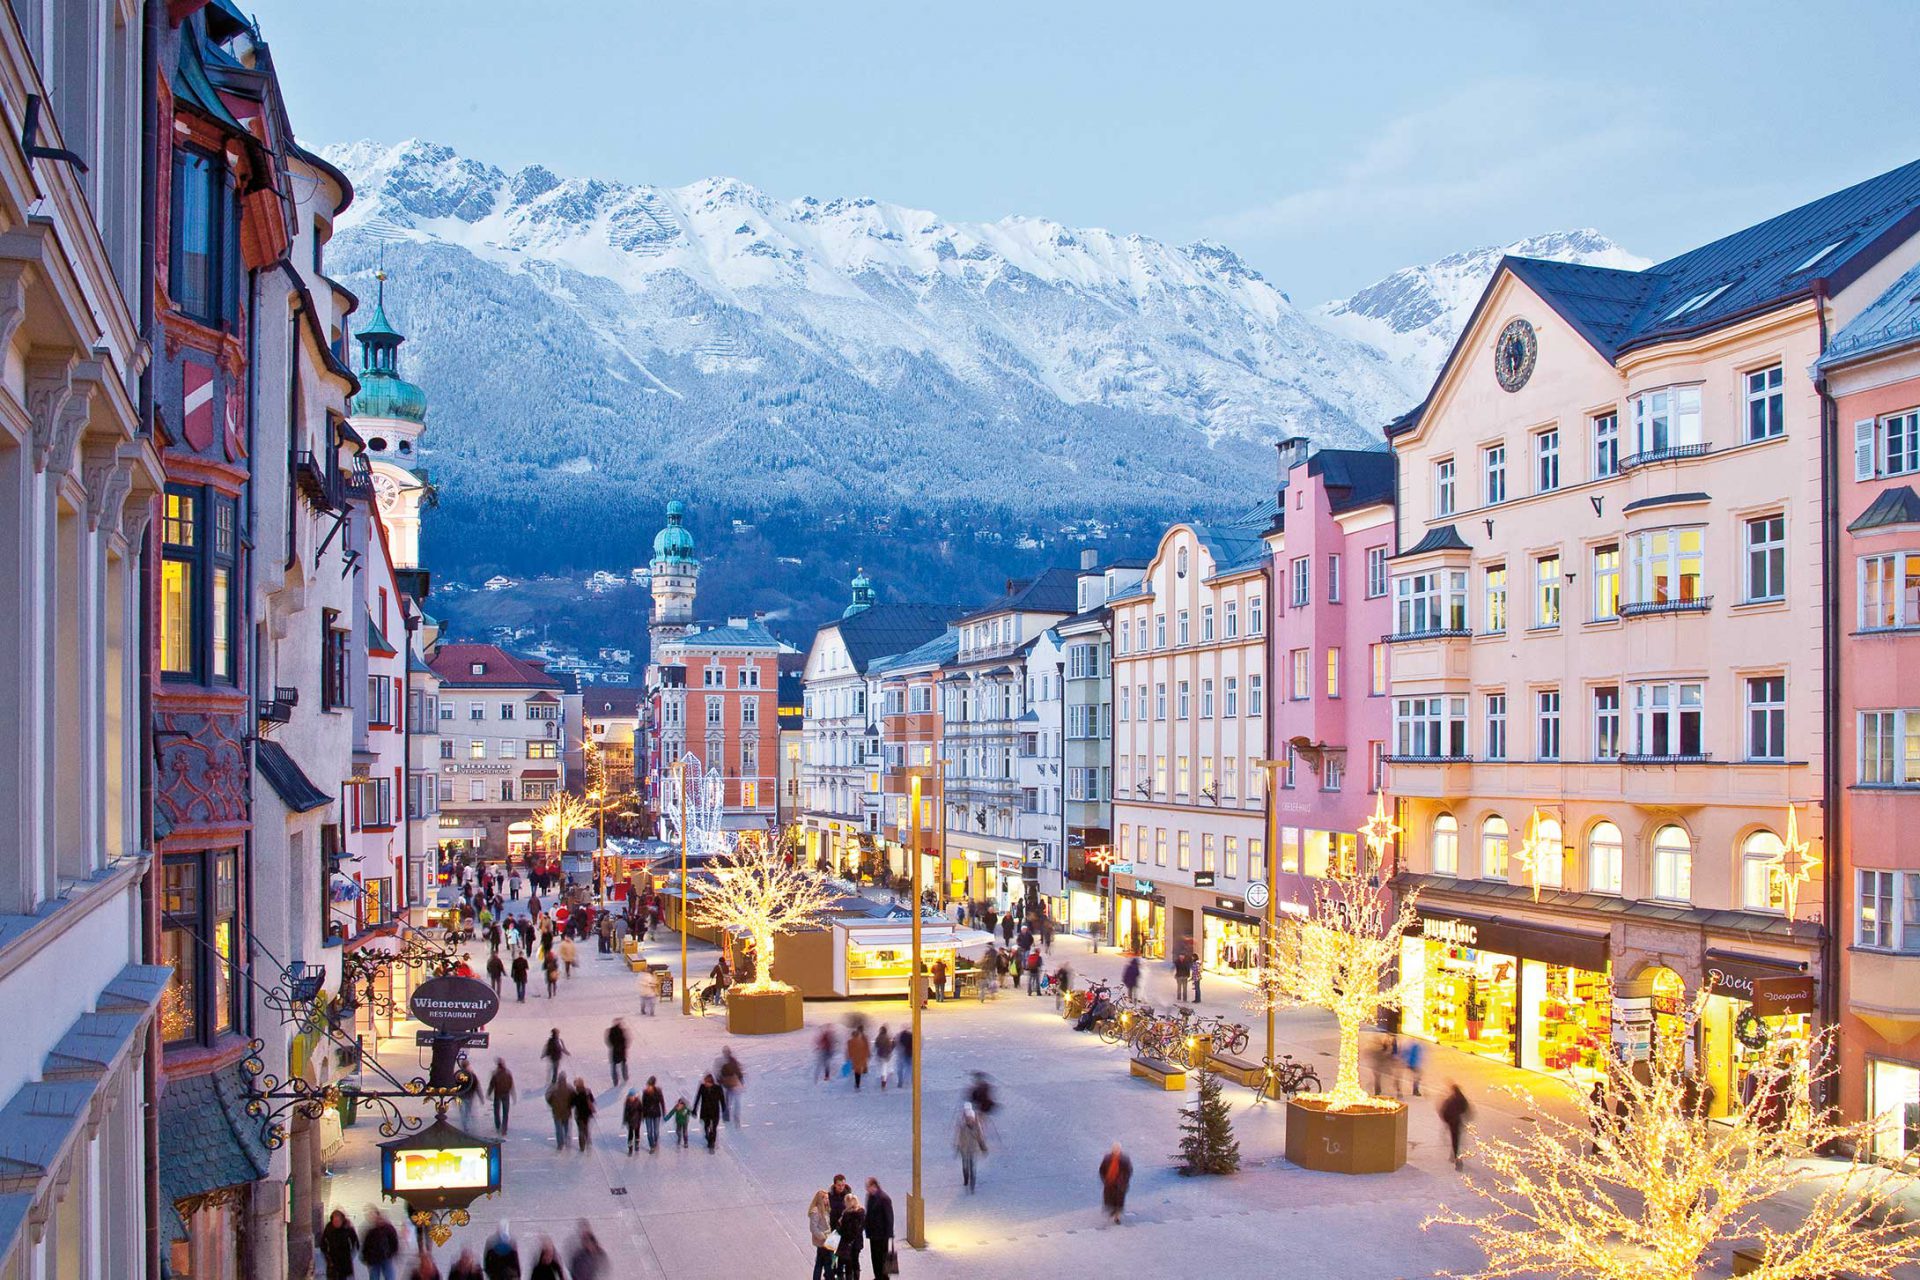 Pedicab Say aside Day Berlin Today, Snow Tomorrow: A guide to skiing Innsbruck | Downdays